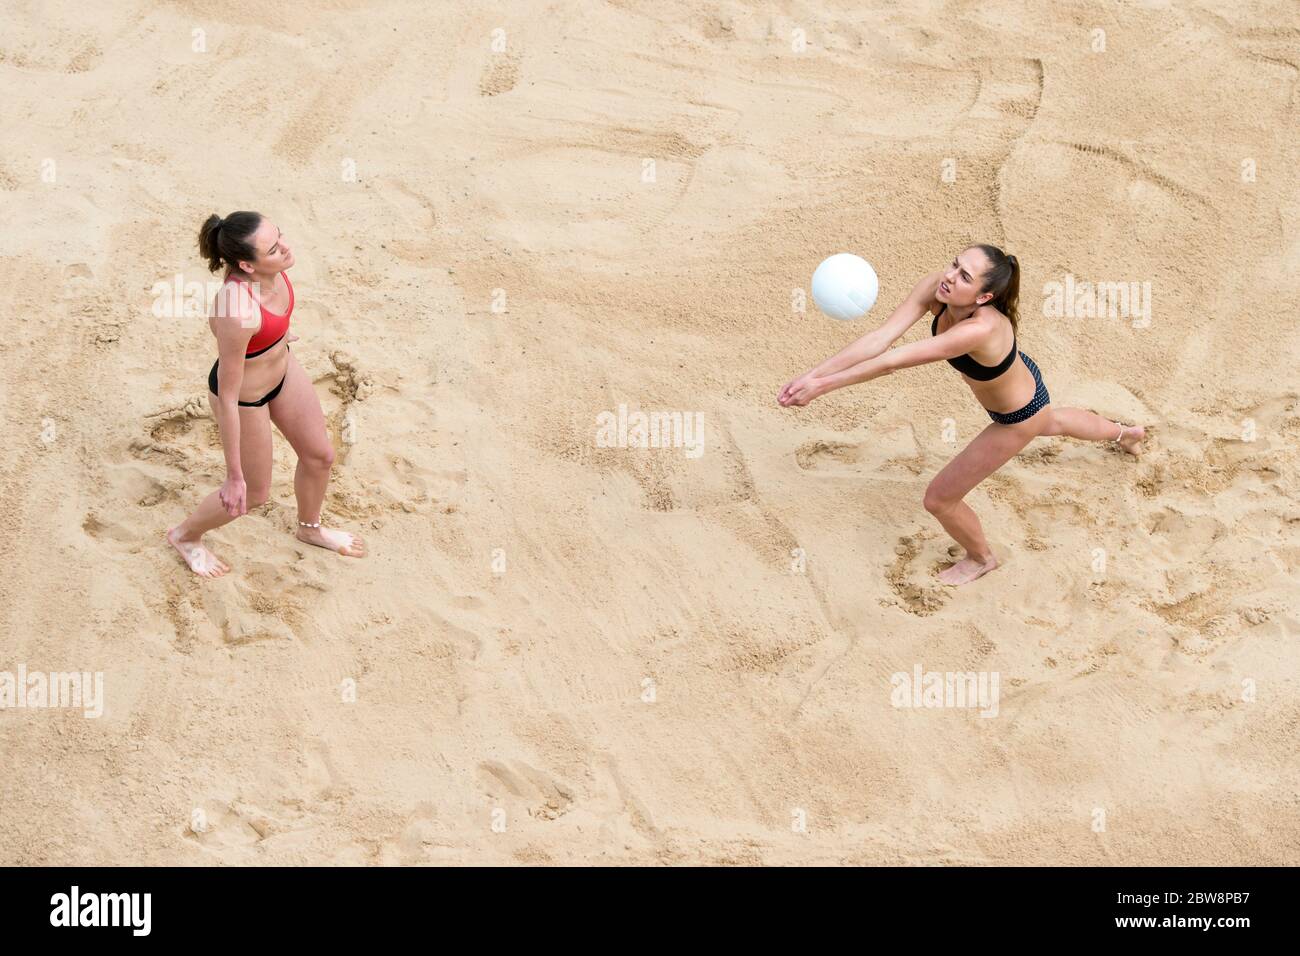 Athletes from beach volleyball in the fight for the ball. Summer vacation and sport concept Stock Photo